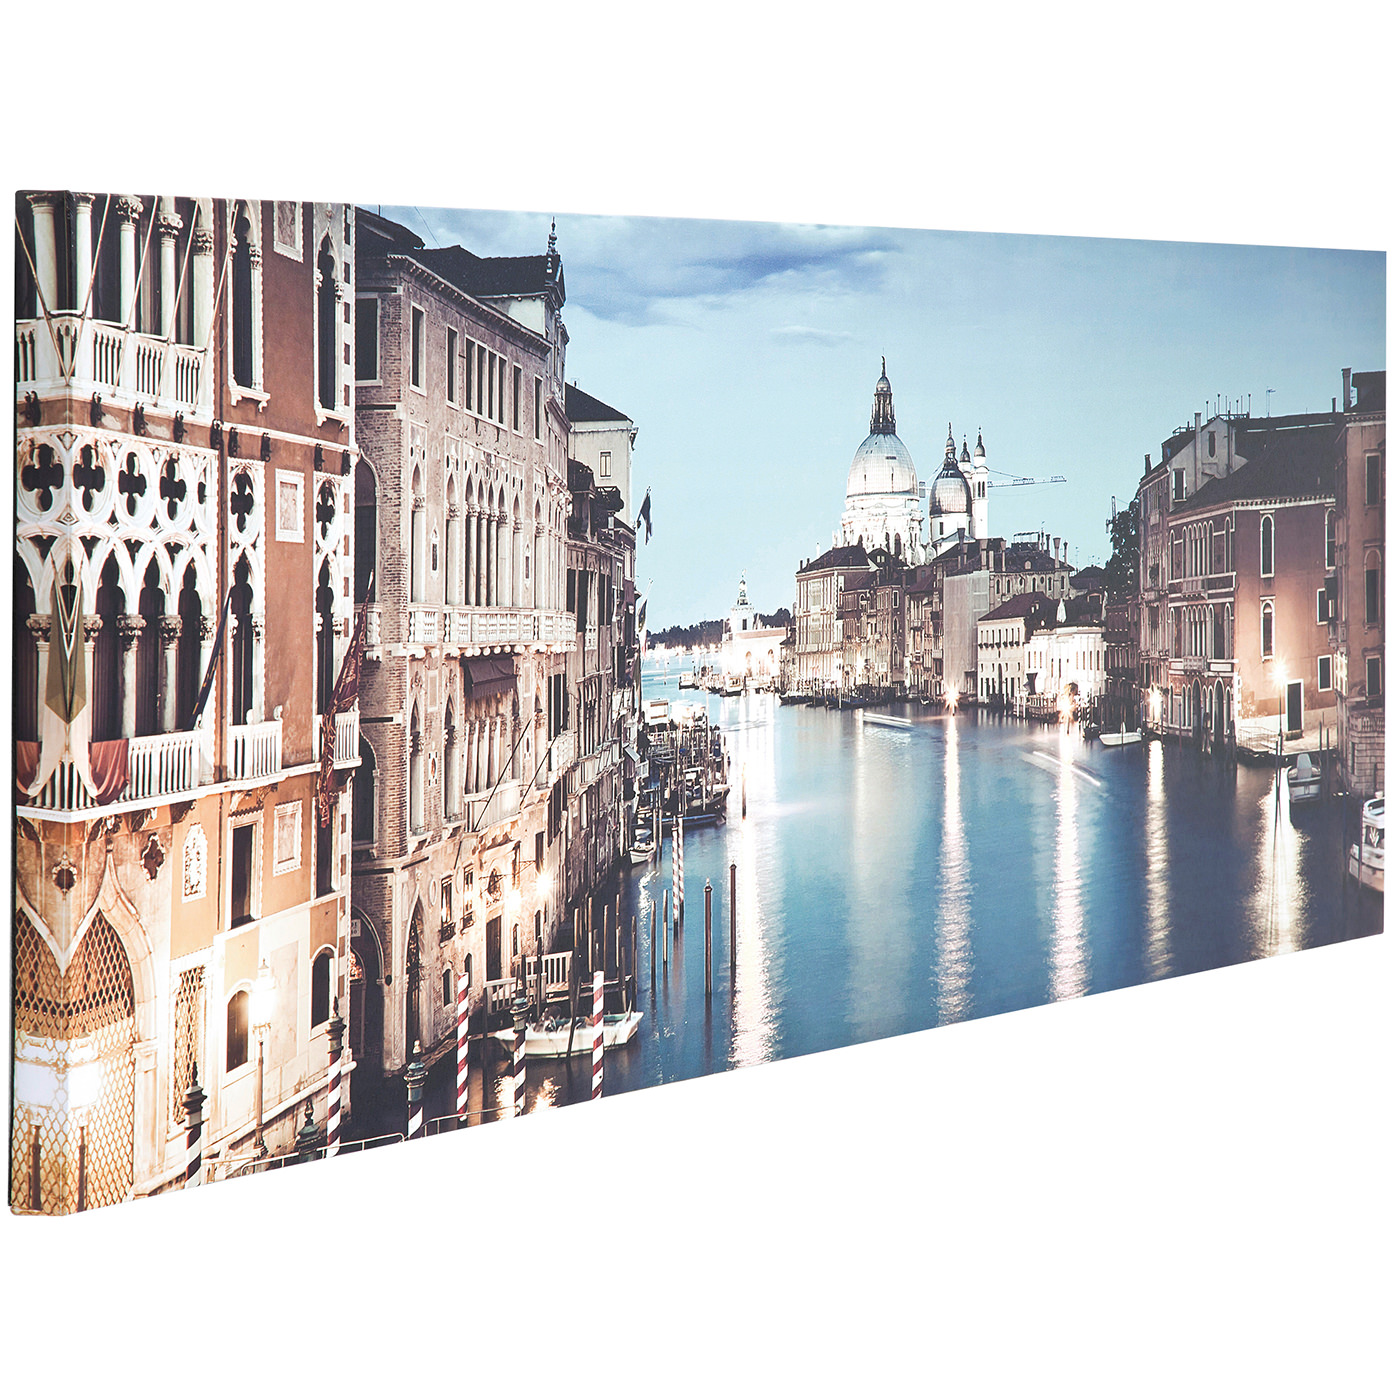 8 1353 156 4 – Picture Canal Grande LED 45x140cm (2)